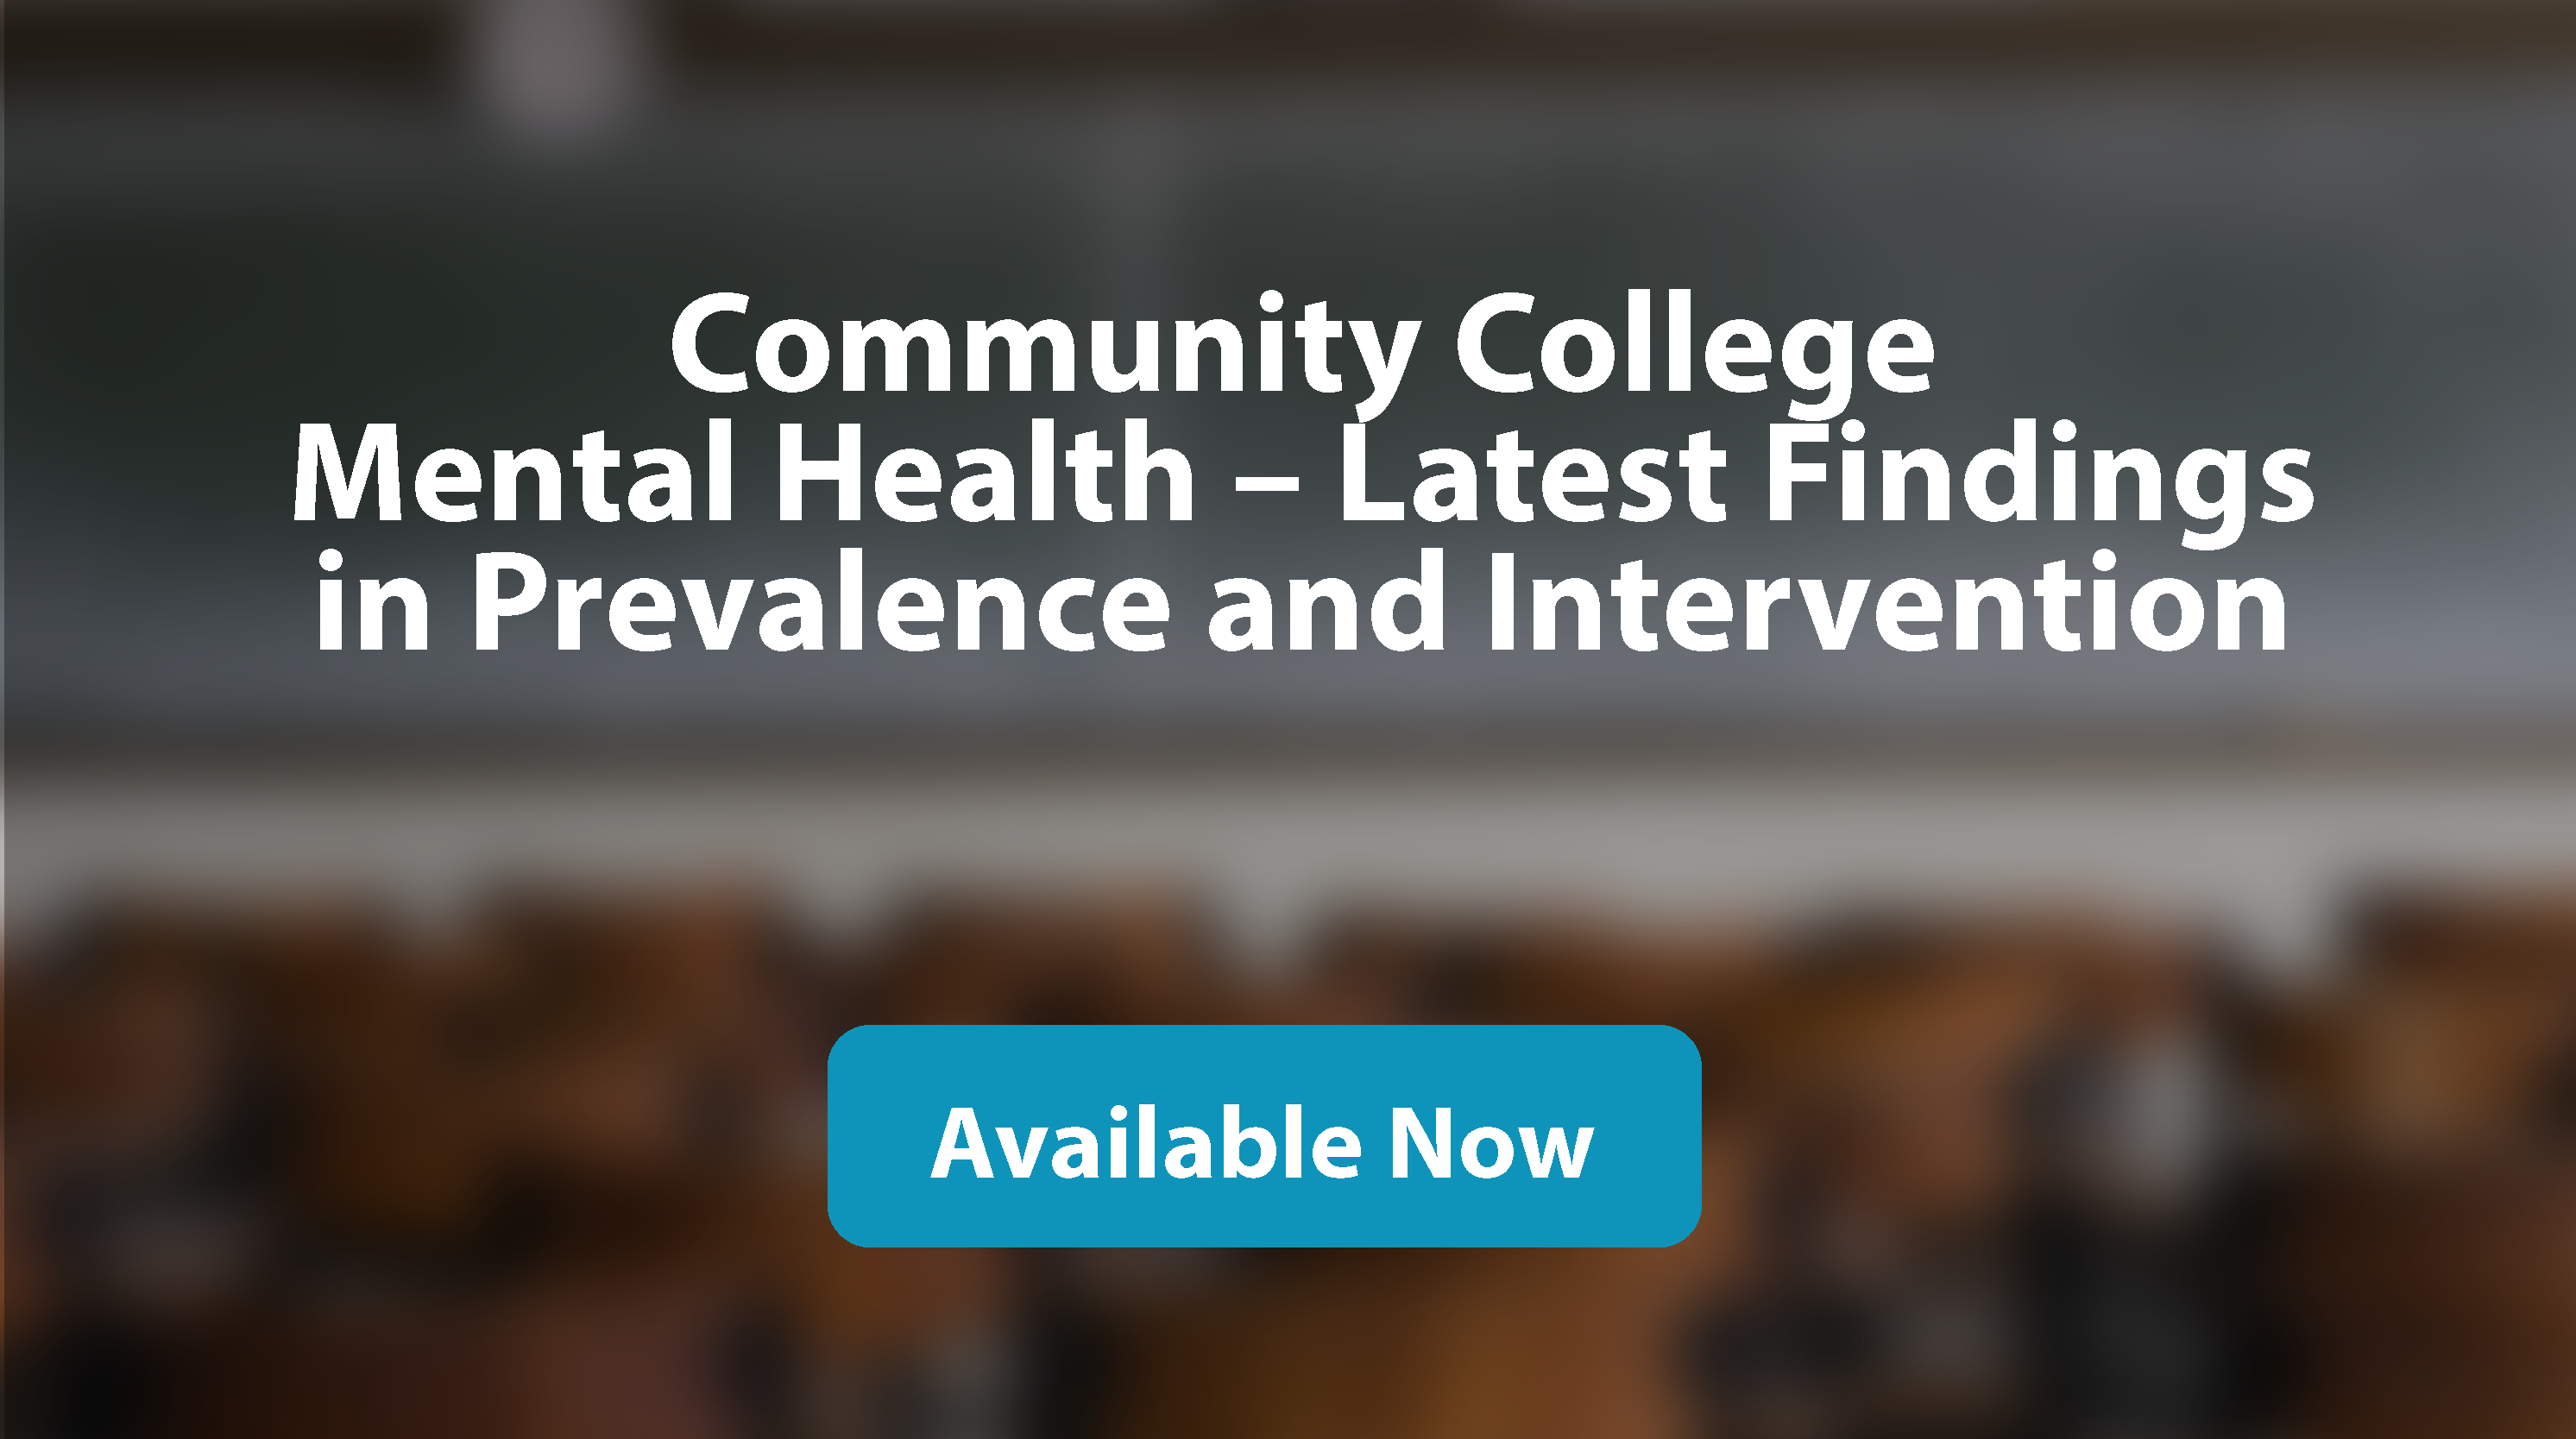 Community College Mental Health – Latest Findings in Prevalence and Intervention